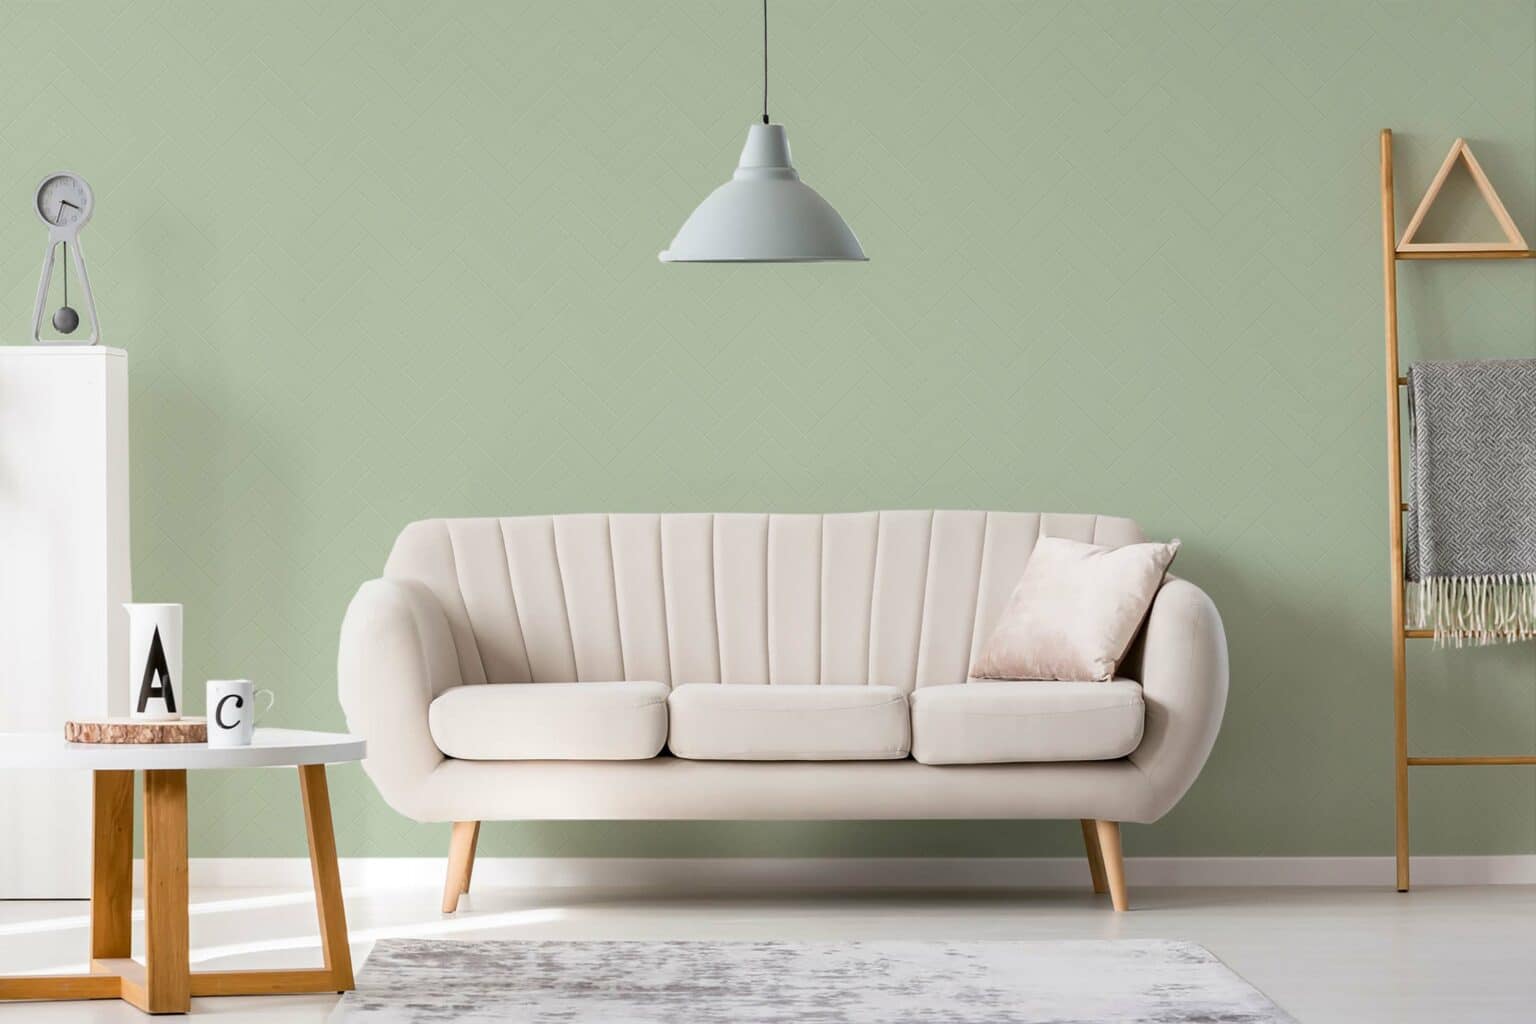 Sage green tile Wallpaper - Peel and Stick or Non-Pasted | Save 25%